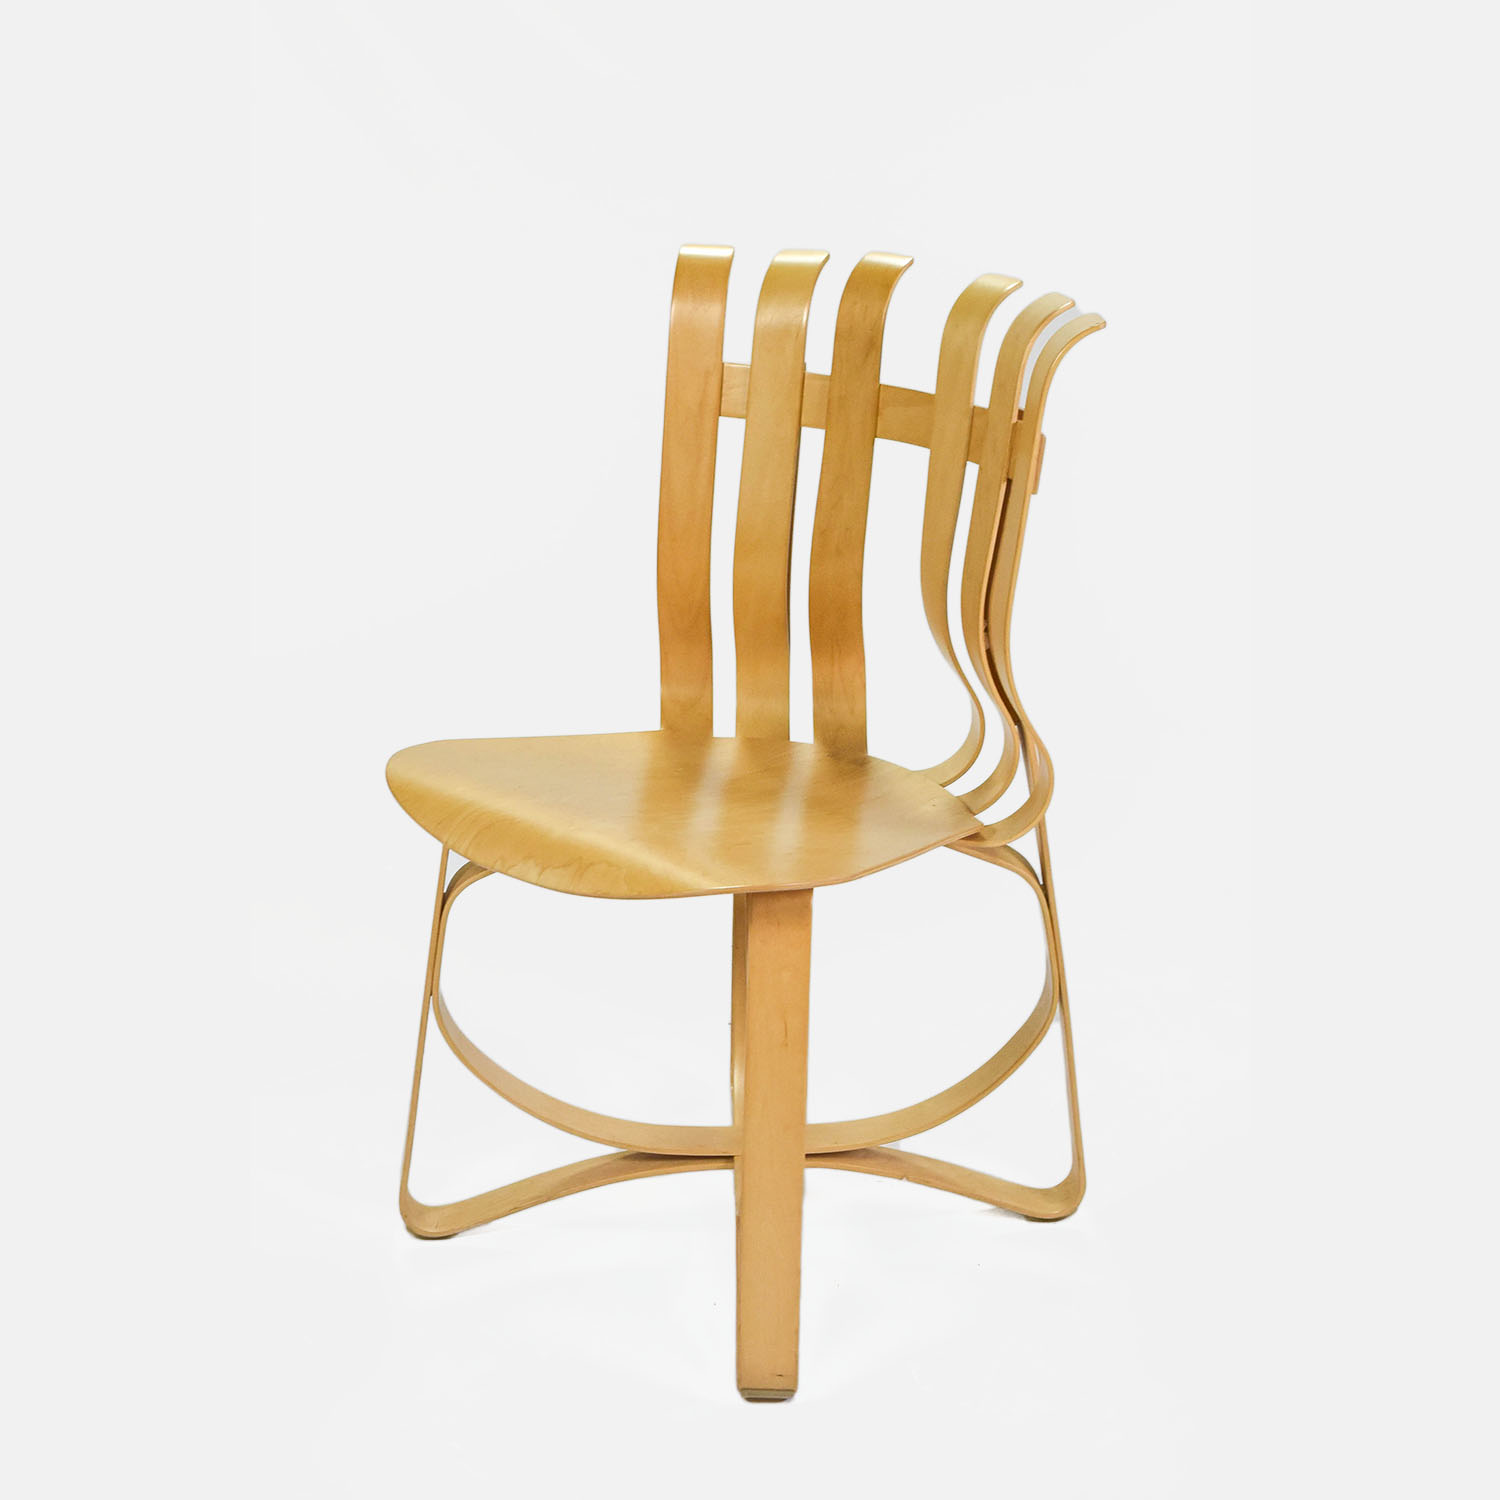 Frank Gehry Hat Trick Knoll Ribbon Chair